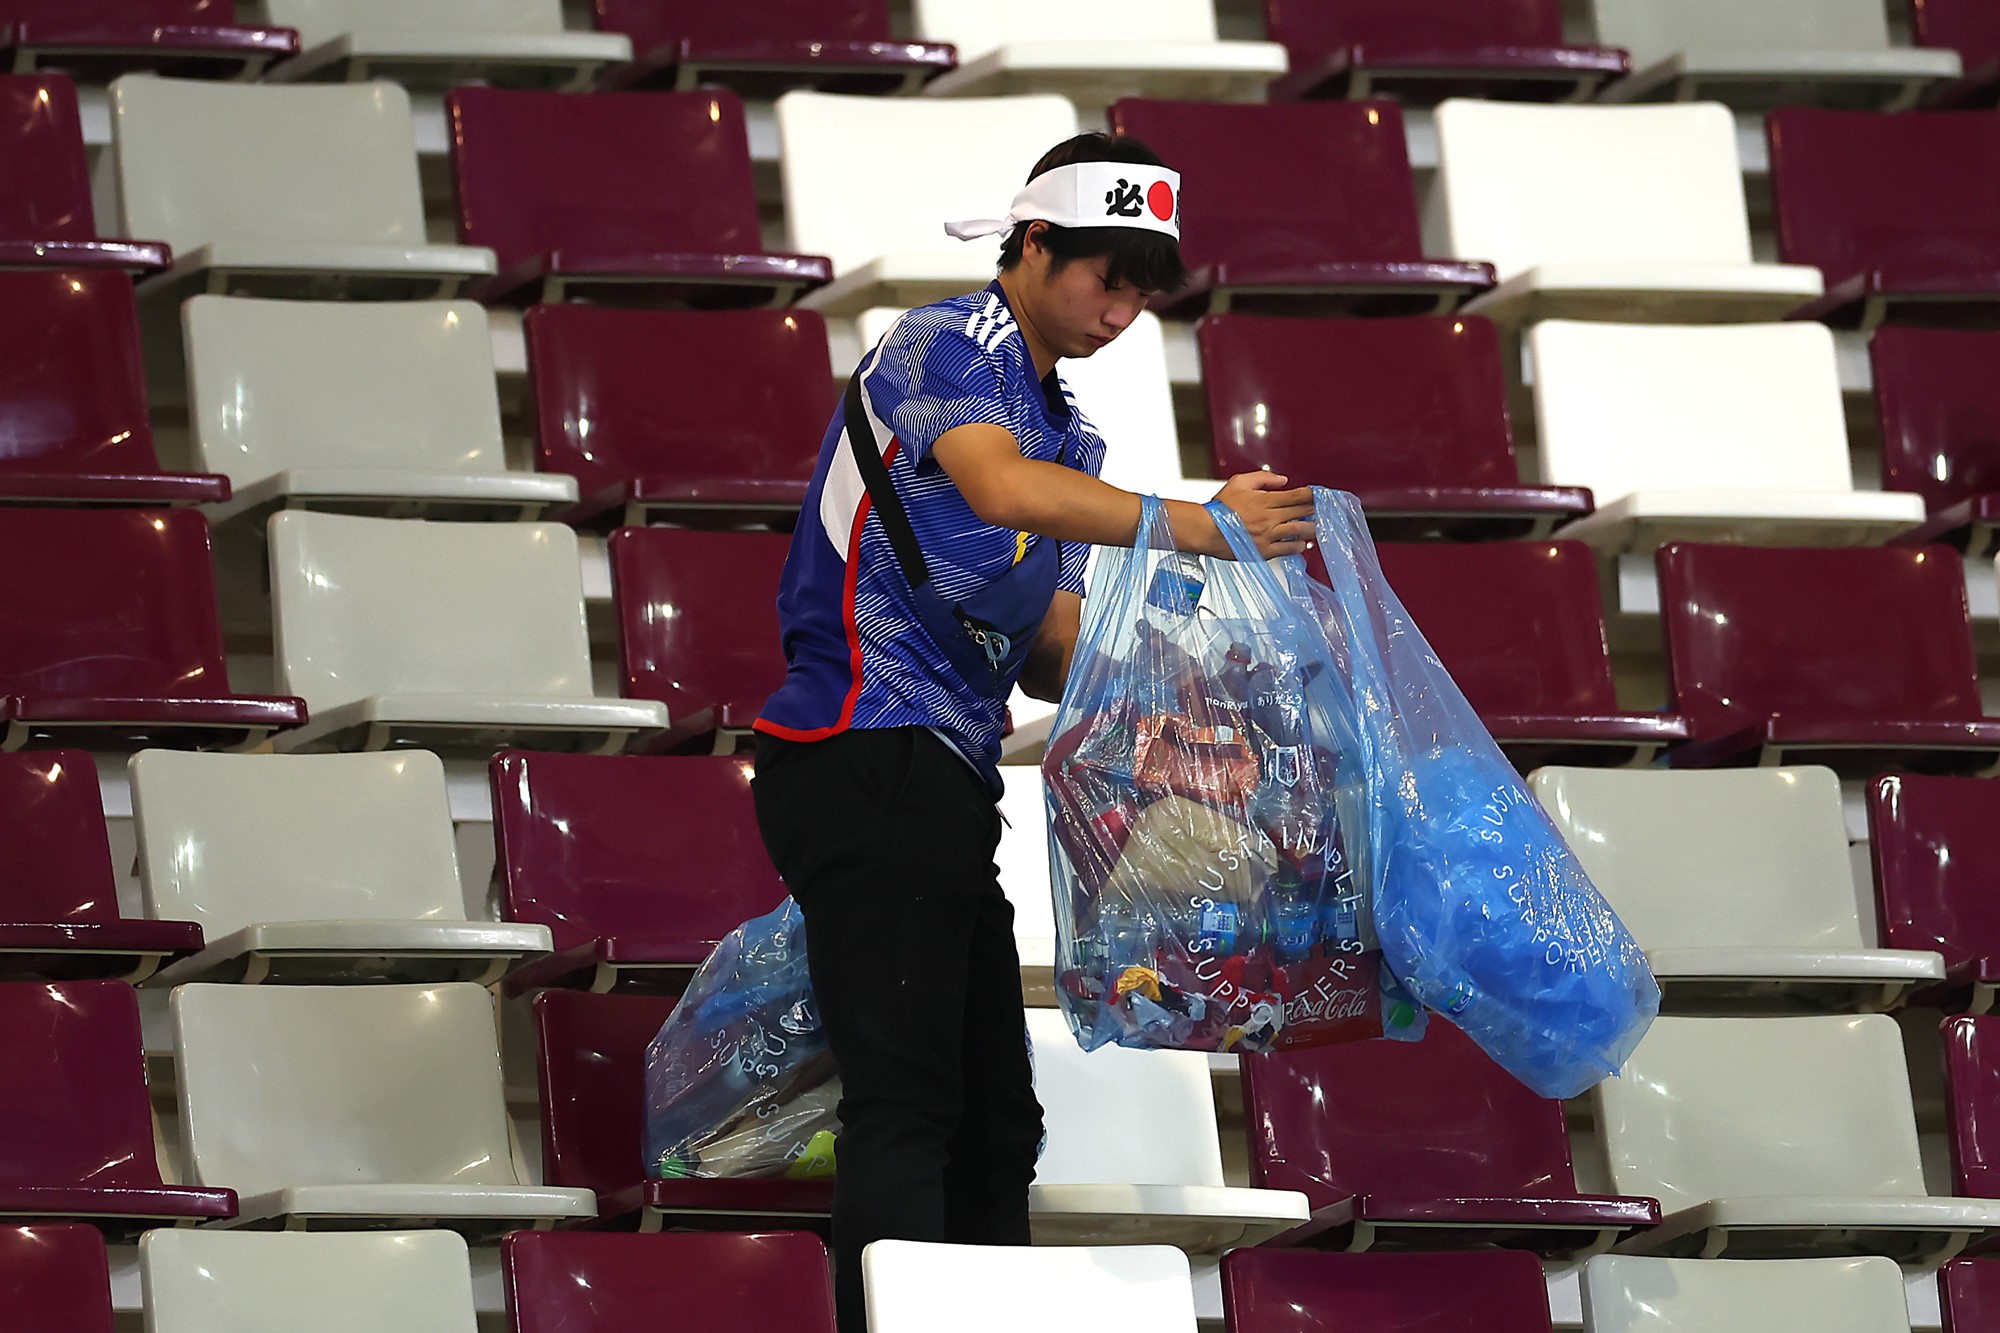 Man with a bag of rubbish